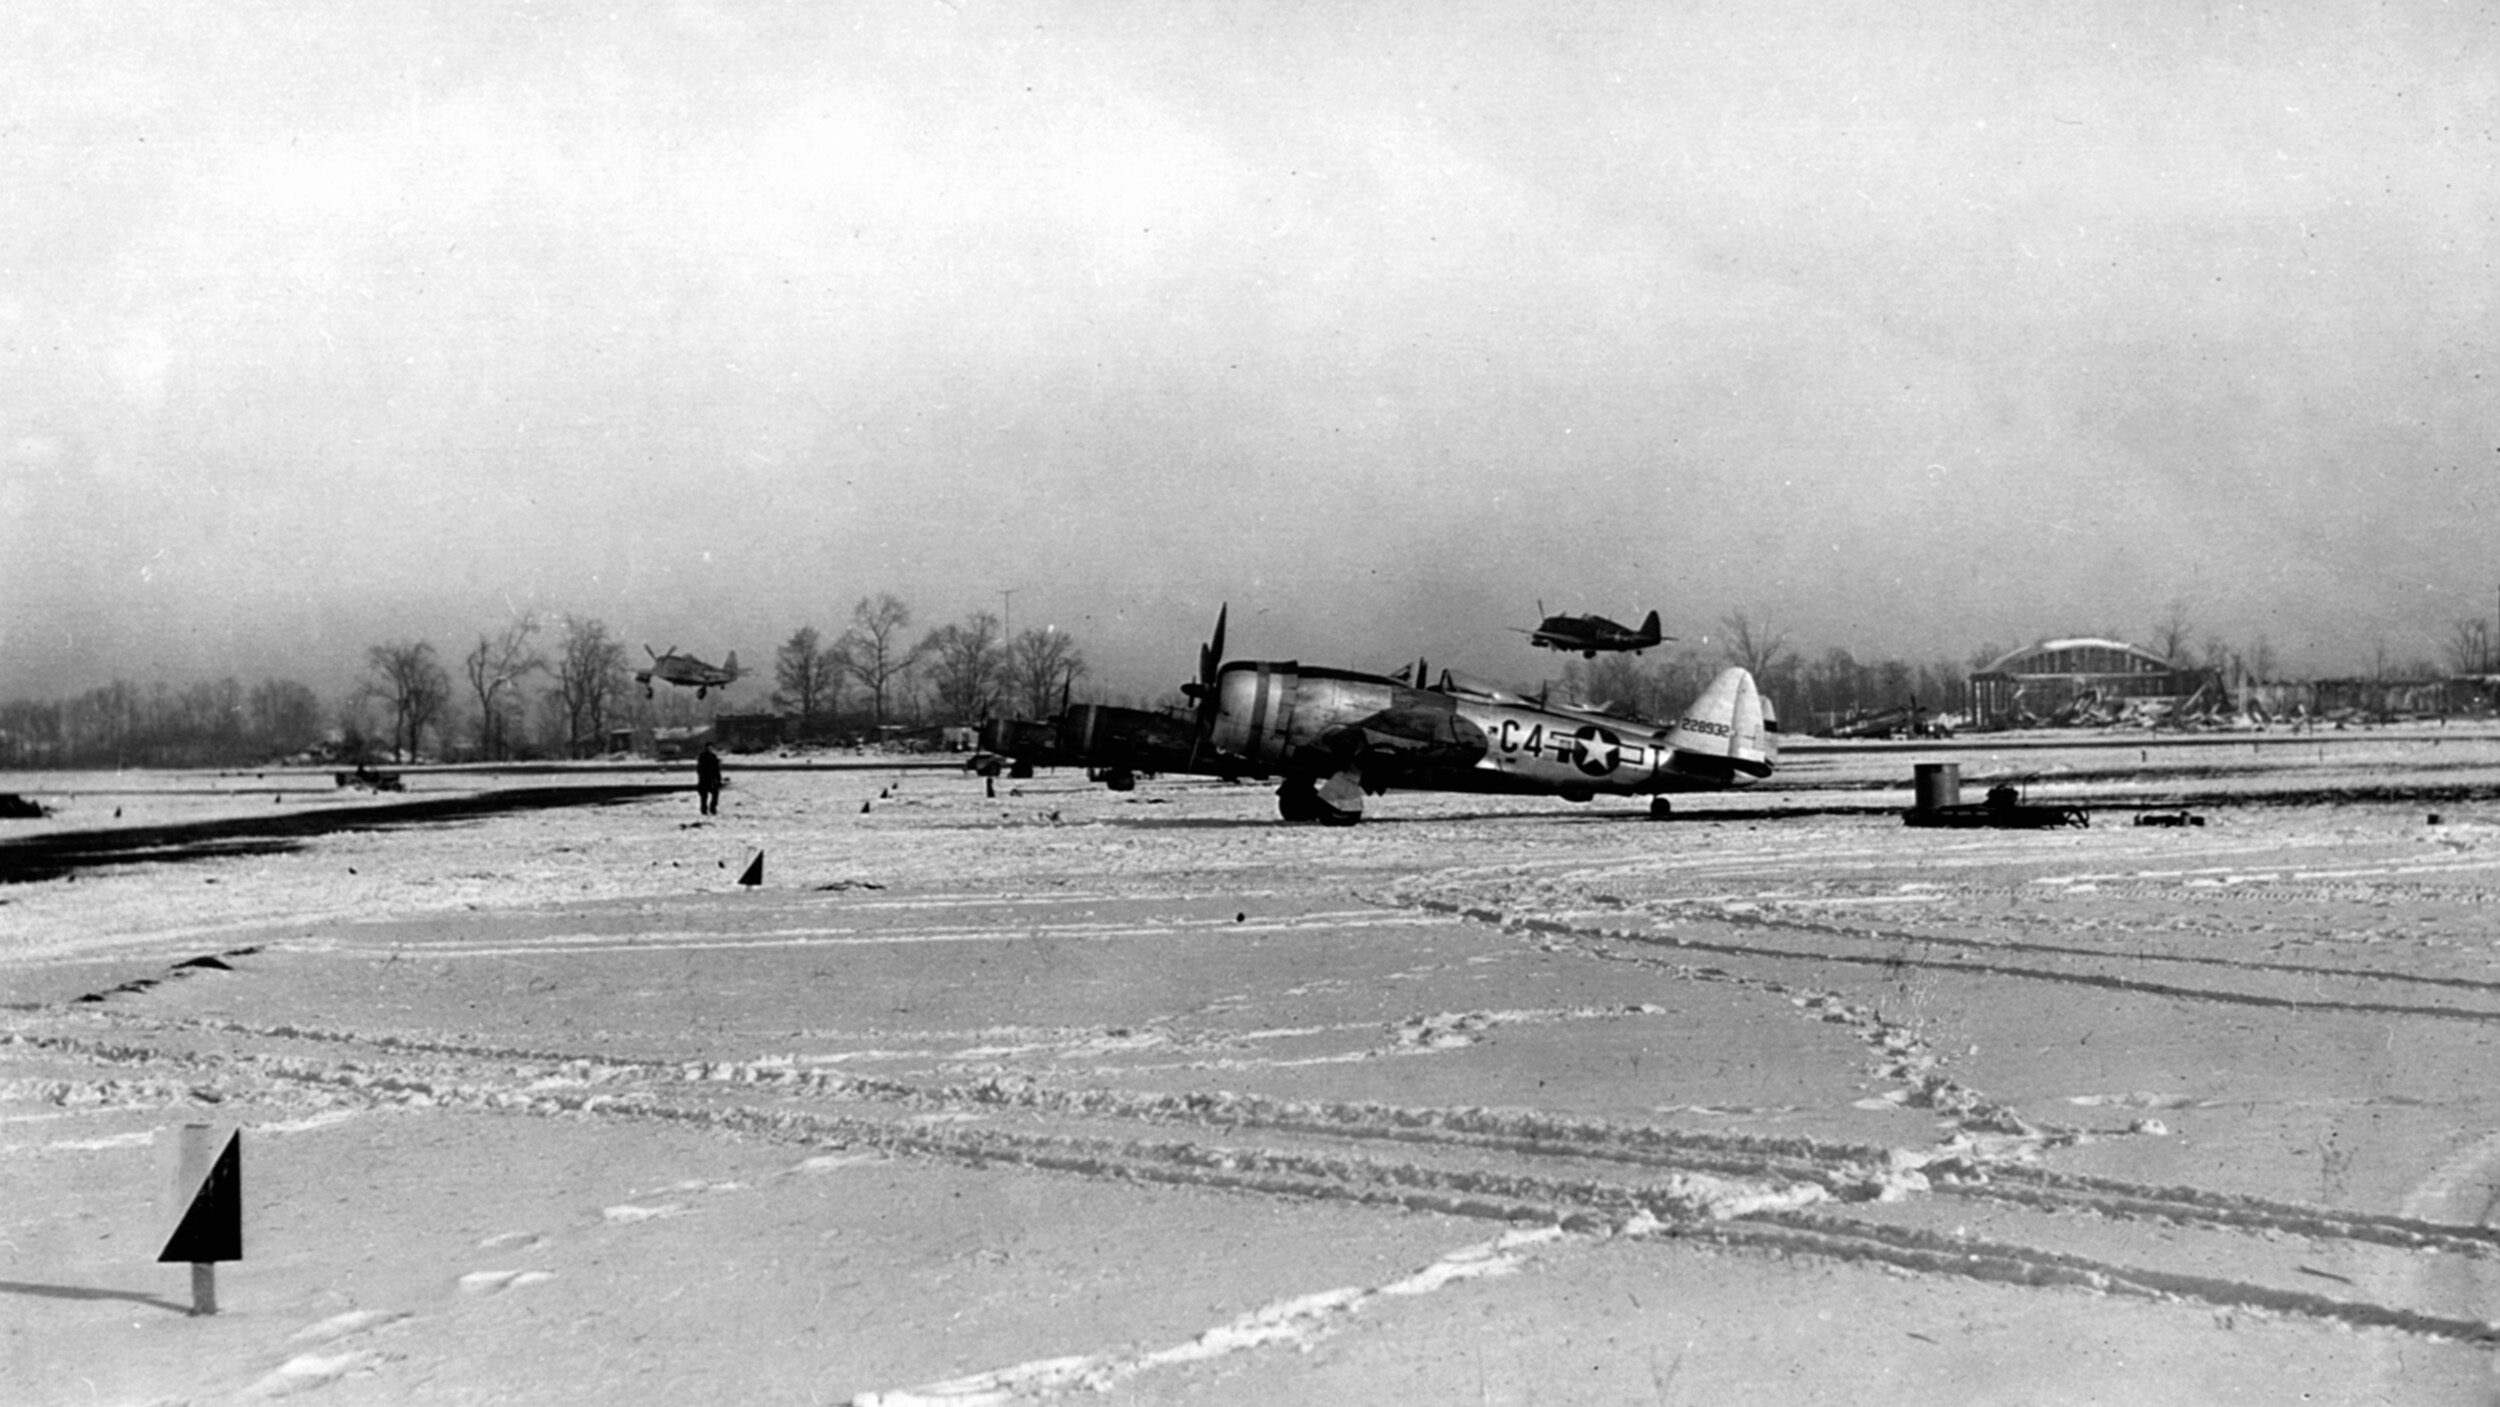 P-47 Thunderbolts of the 365th Fighter Bomber Group take off from a forward airbase on a mission to strafe German motorized transports. Tactical air support provided by the Ninth Air Force proved invaluable during the offensive in Western Europe.